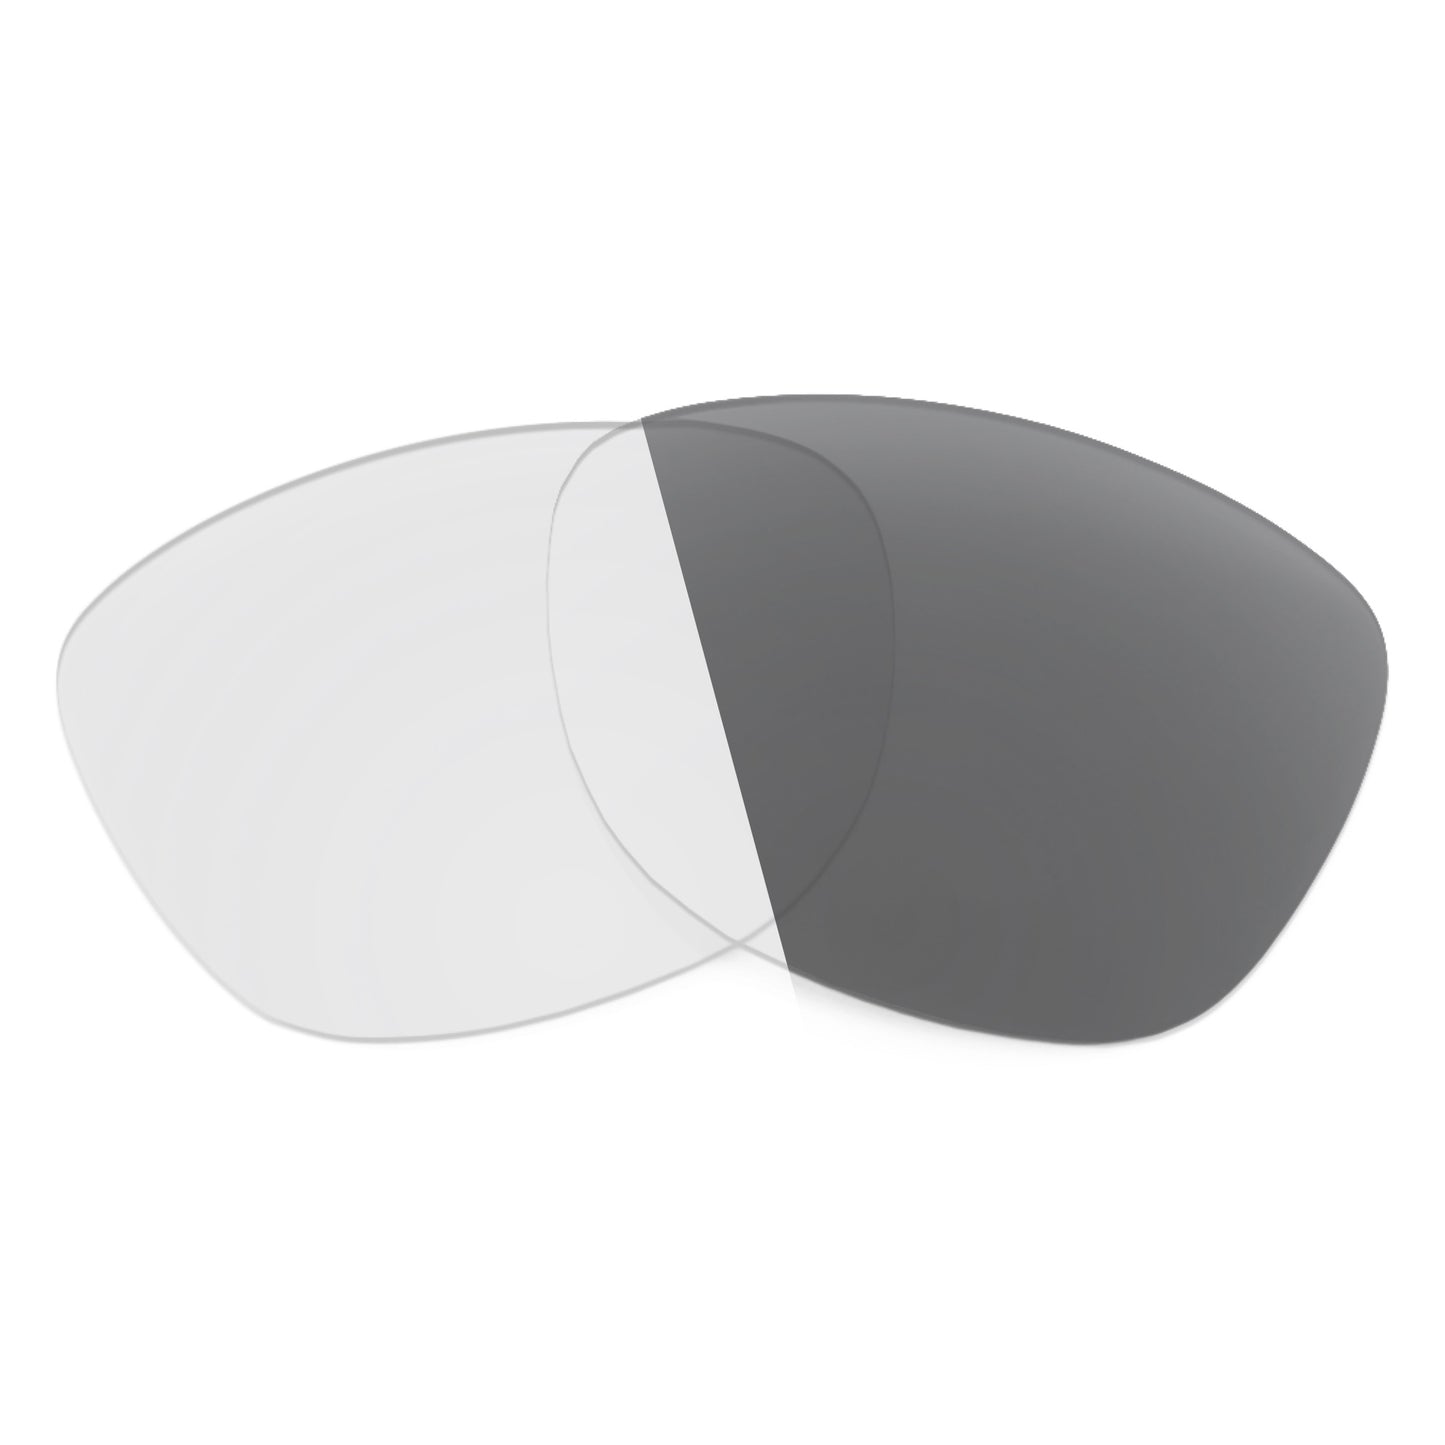 Revant replacement lenses for Ray-Ban Jackie Ohh II RB4098 60mm Non-Polarized Adapt Gray Photochromic